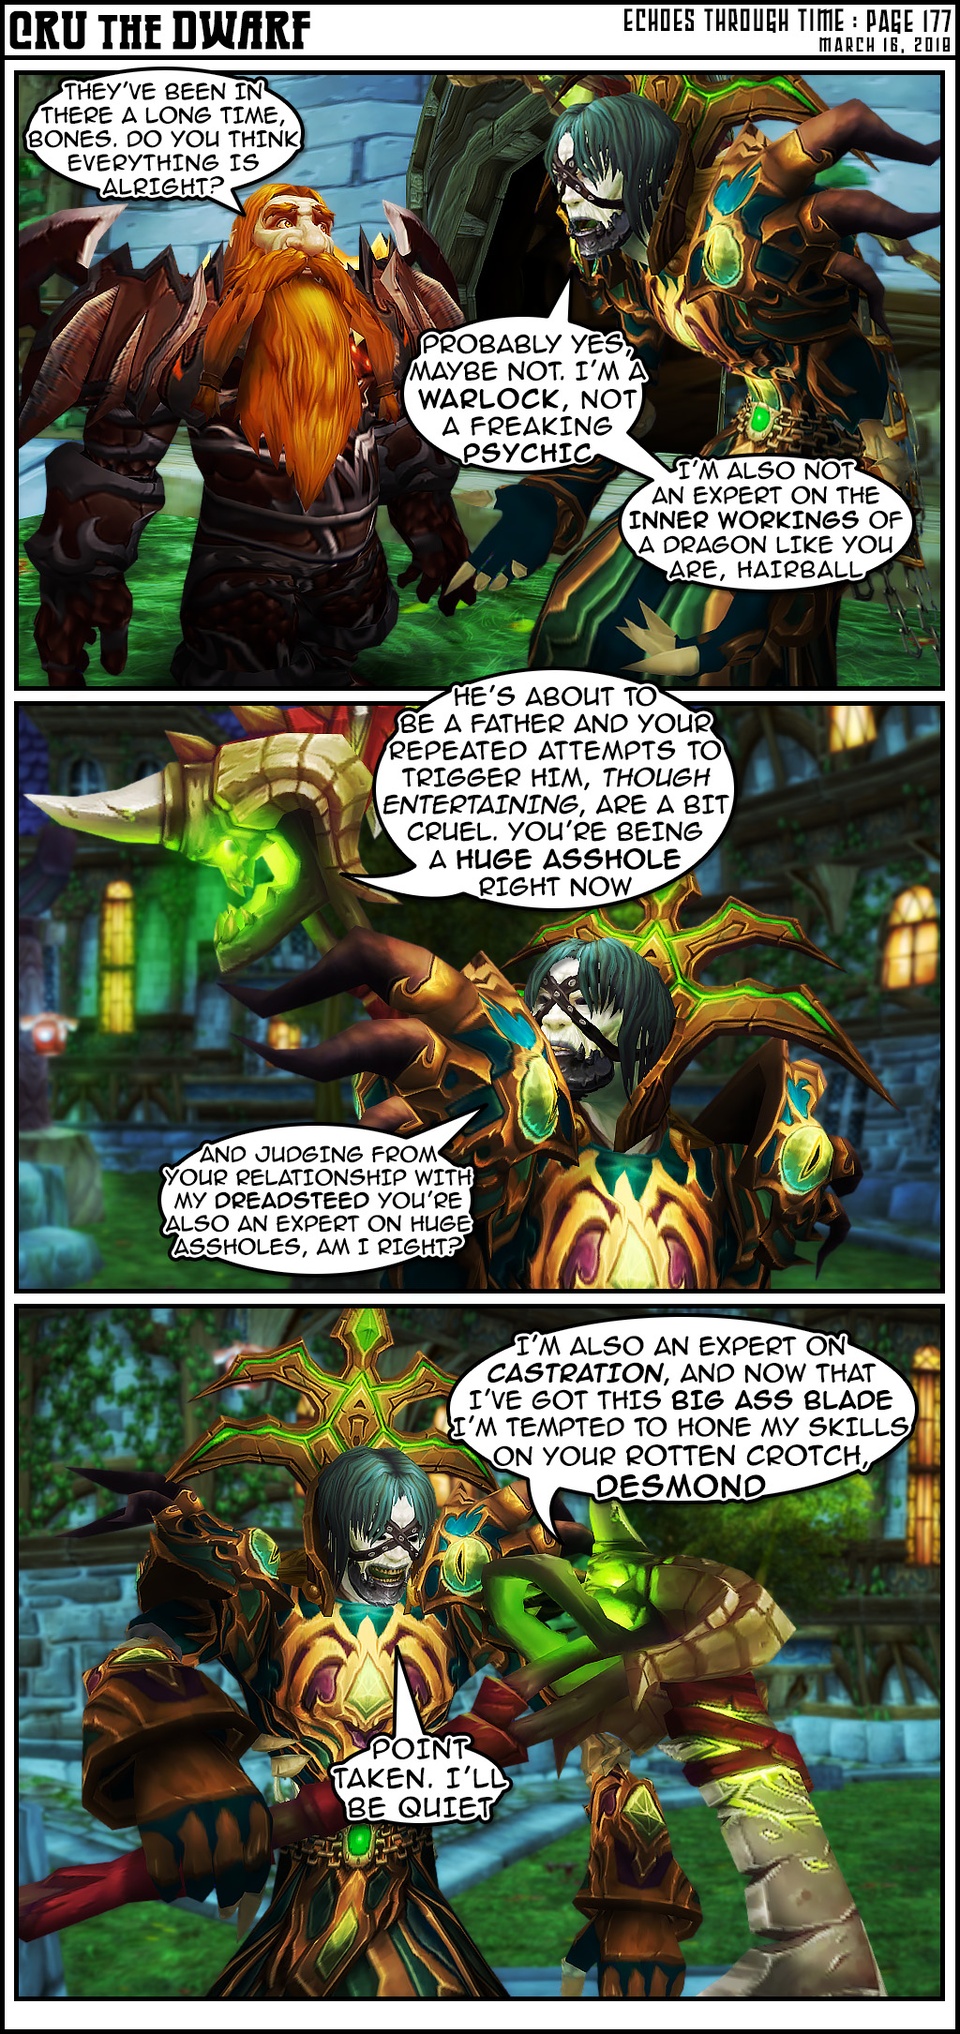 Echoes Through Time - Pg 177 “Castration”